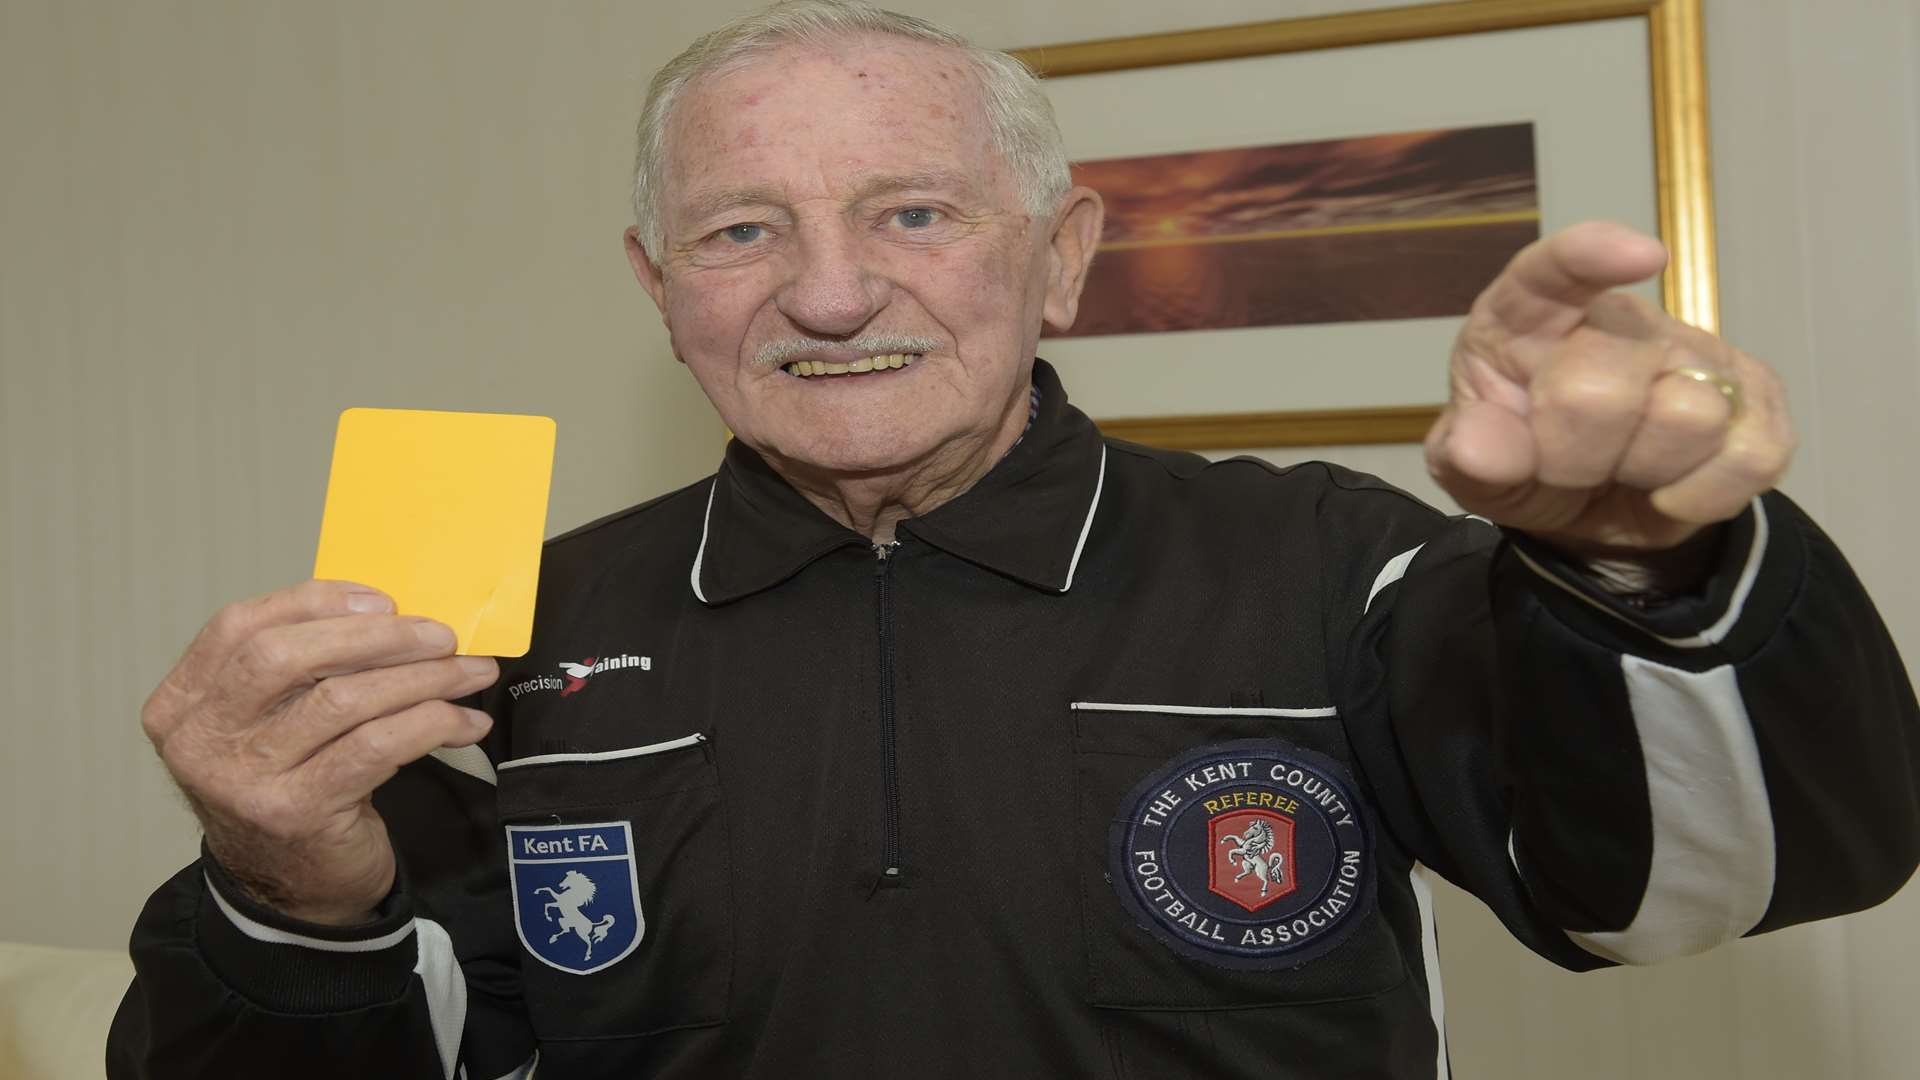 Ernie McGarvey has retired after 65 years of football